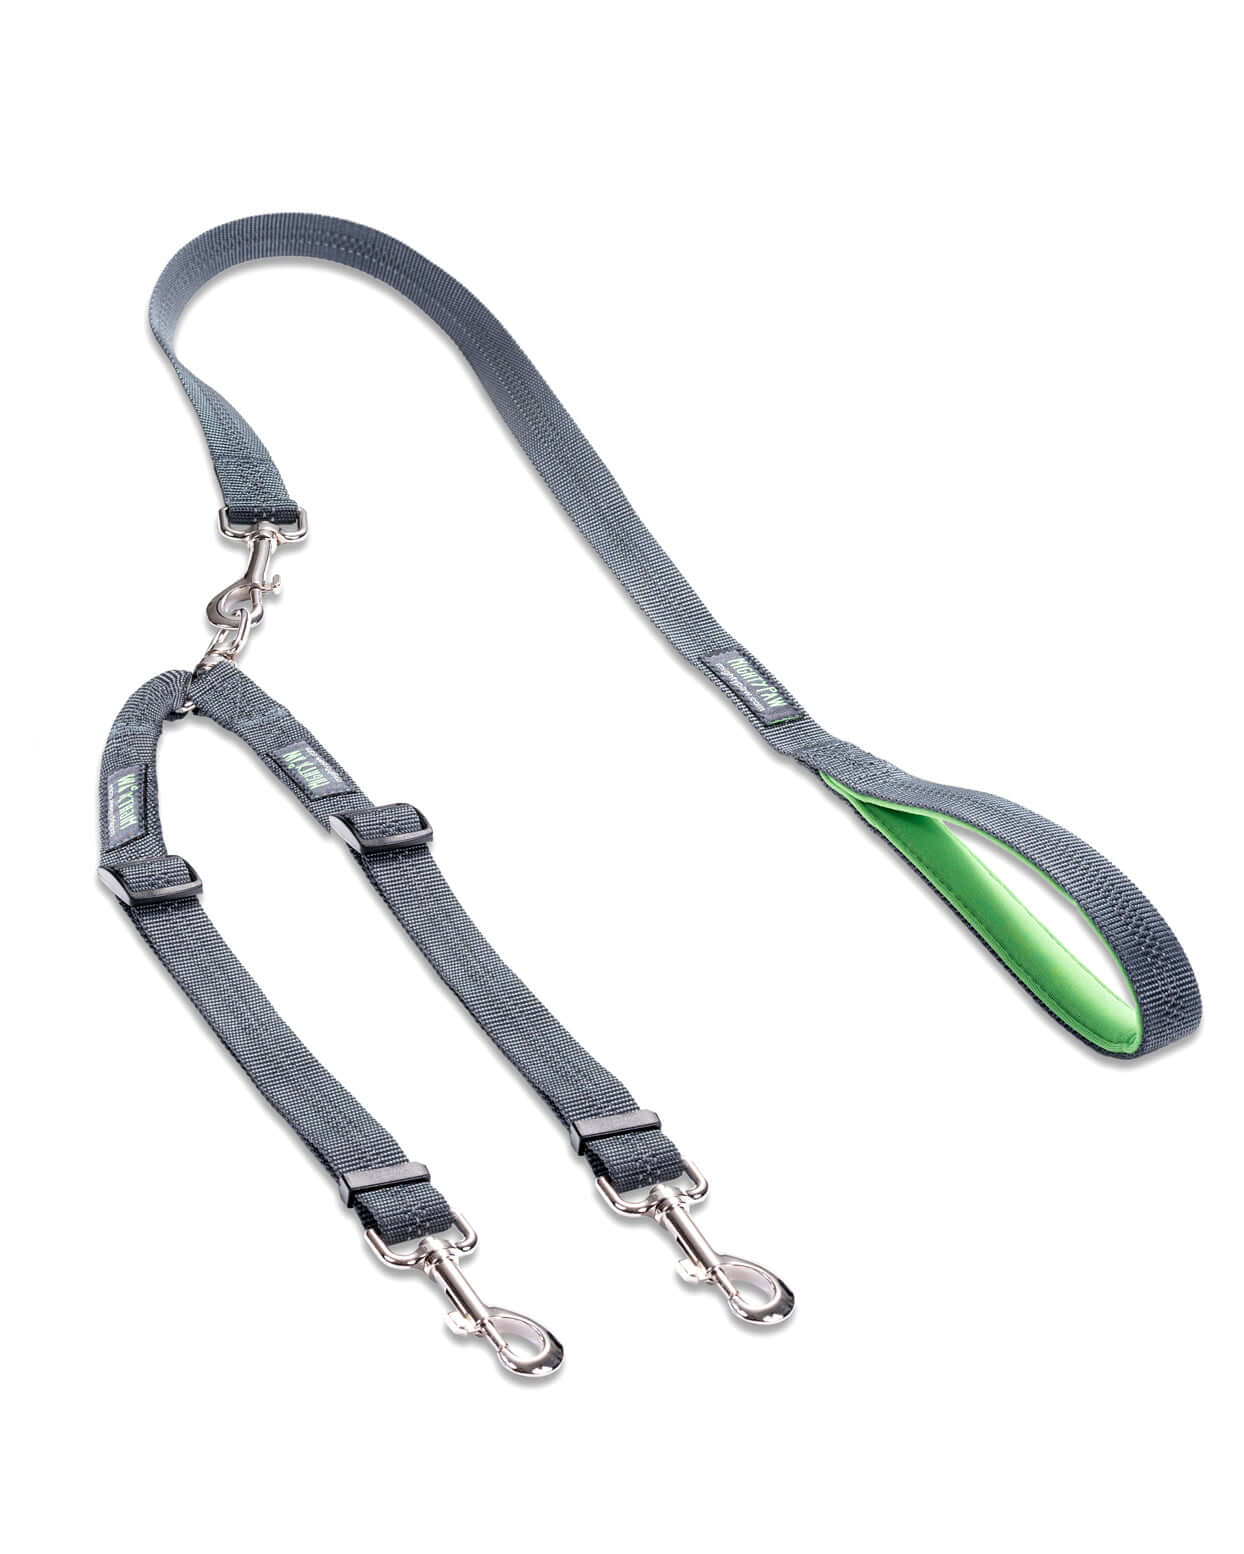 Adjustable-Length Double Dog Leash - Tangle-Free, Reflective Swivel Attachments